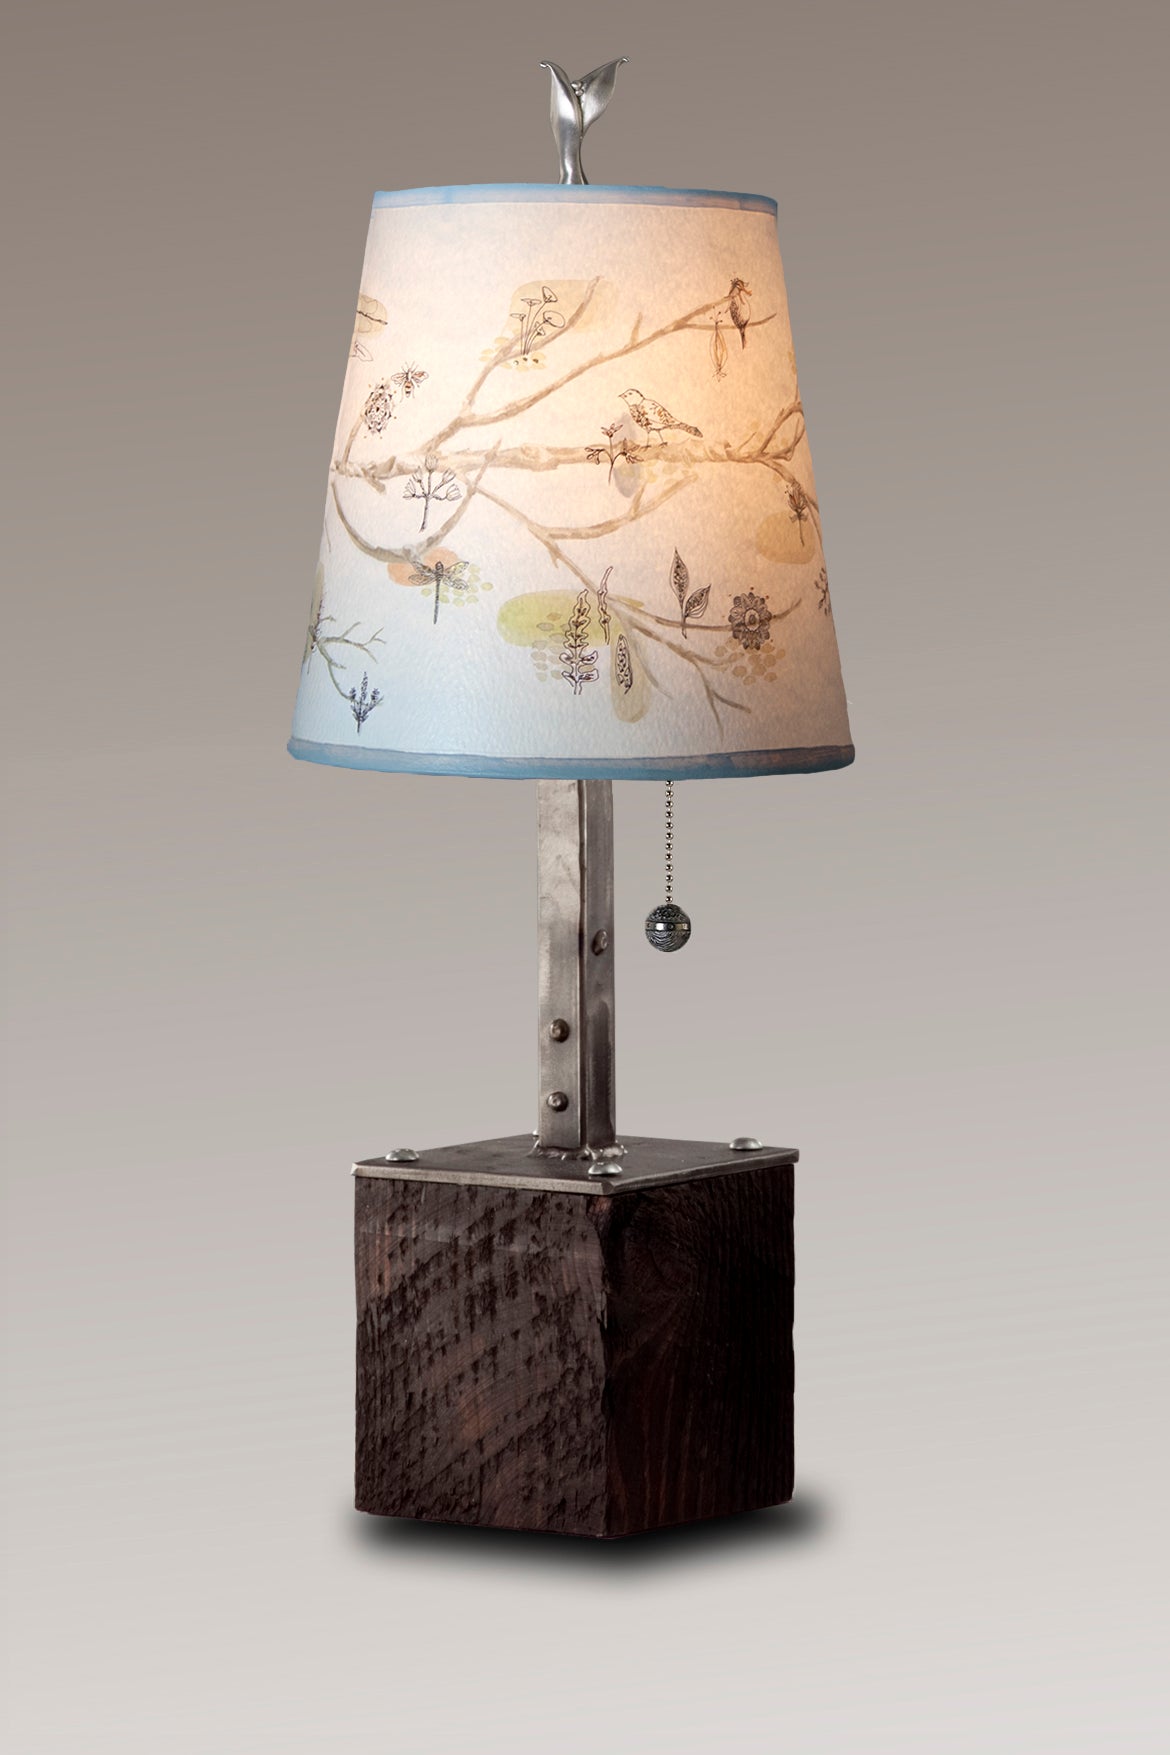 Janna Ugone & Co Table Lamps Steel Table Lamp on Reclaimed Wood with Small Drum Shade in Artful Branch